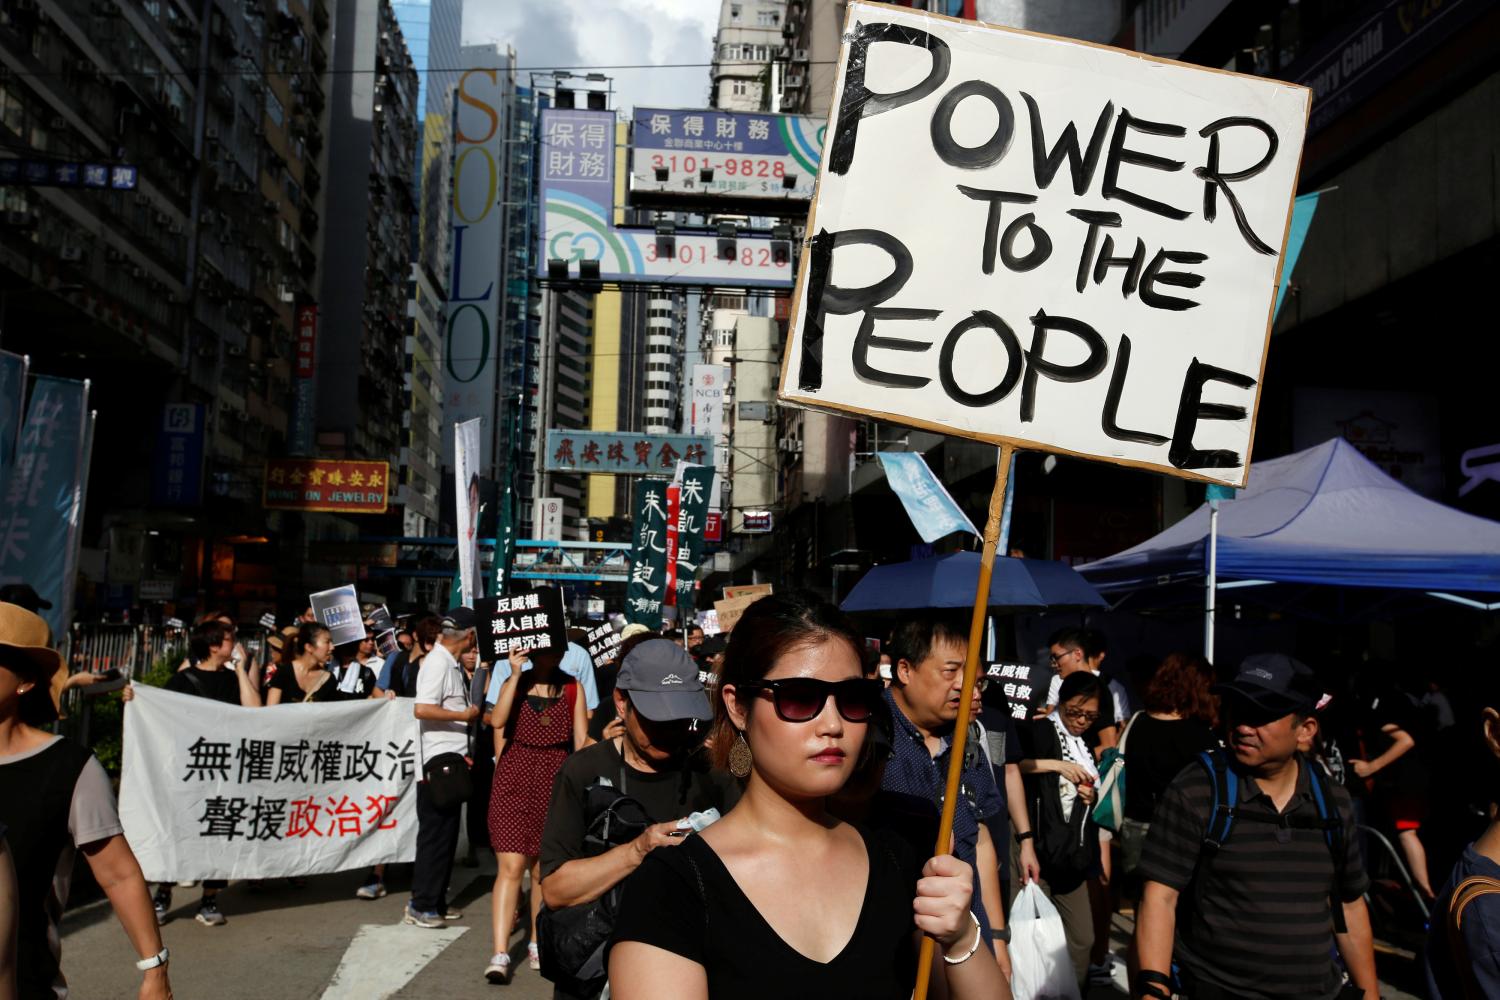 Pro-democracy activists take part in a protest on China's National Day in Hong Kong